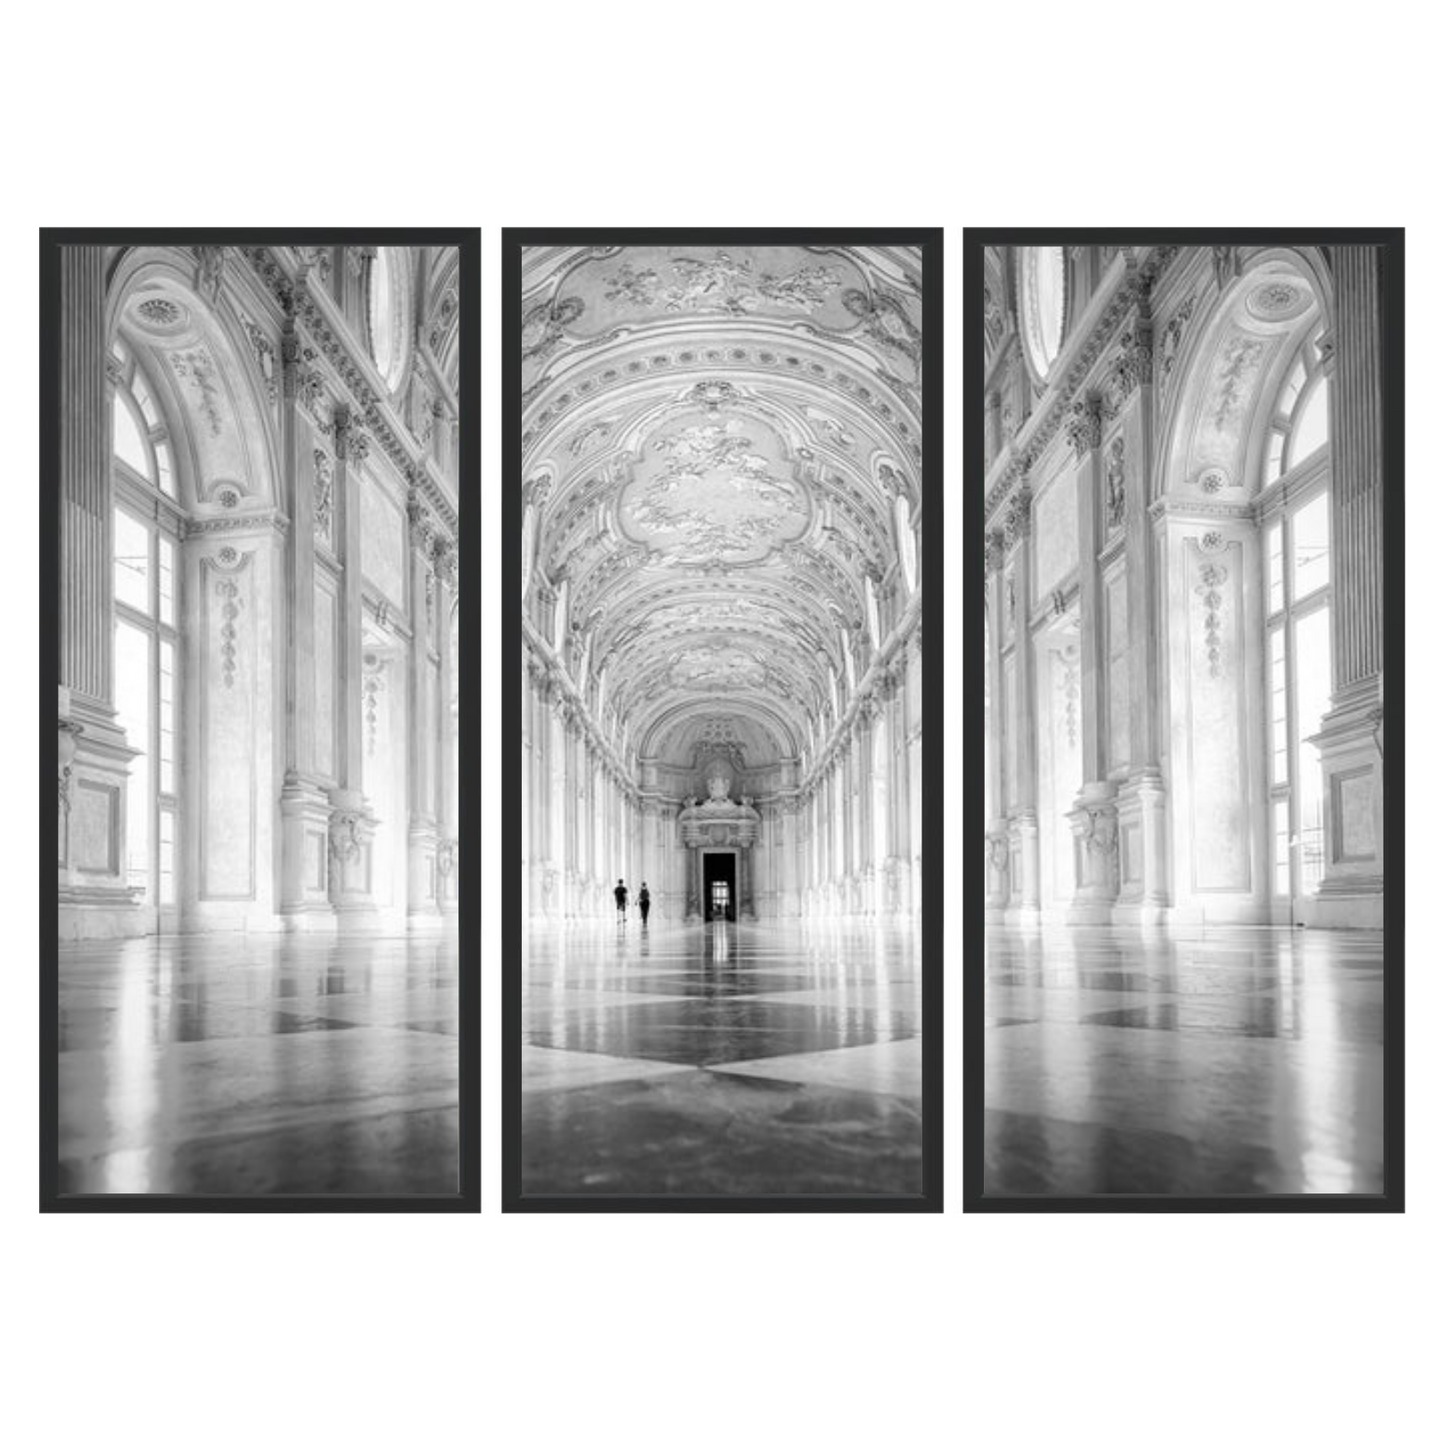 Lost in the light Triptych